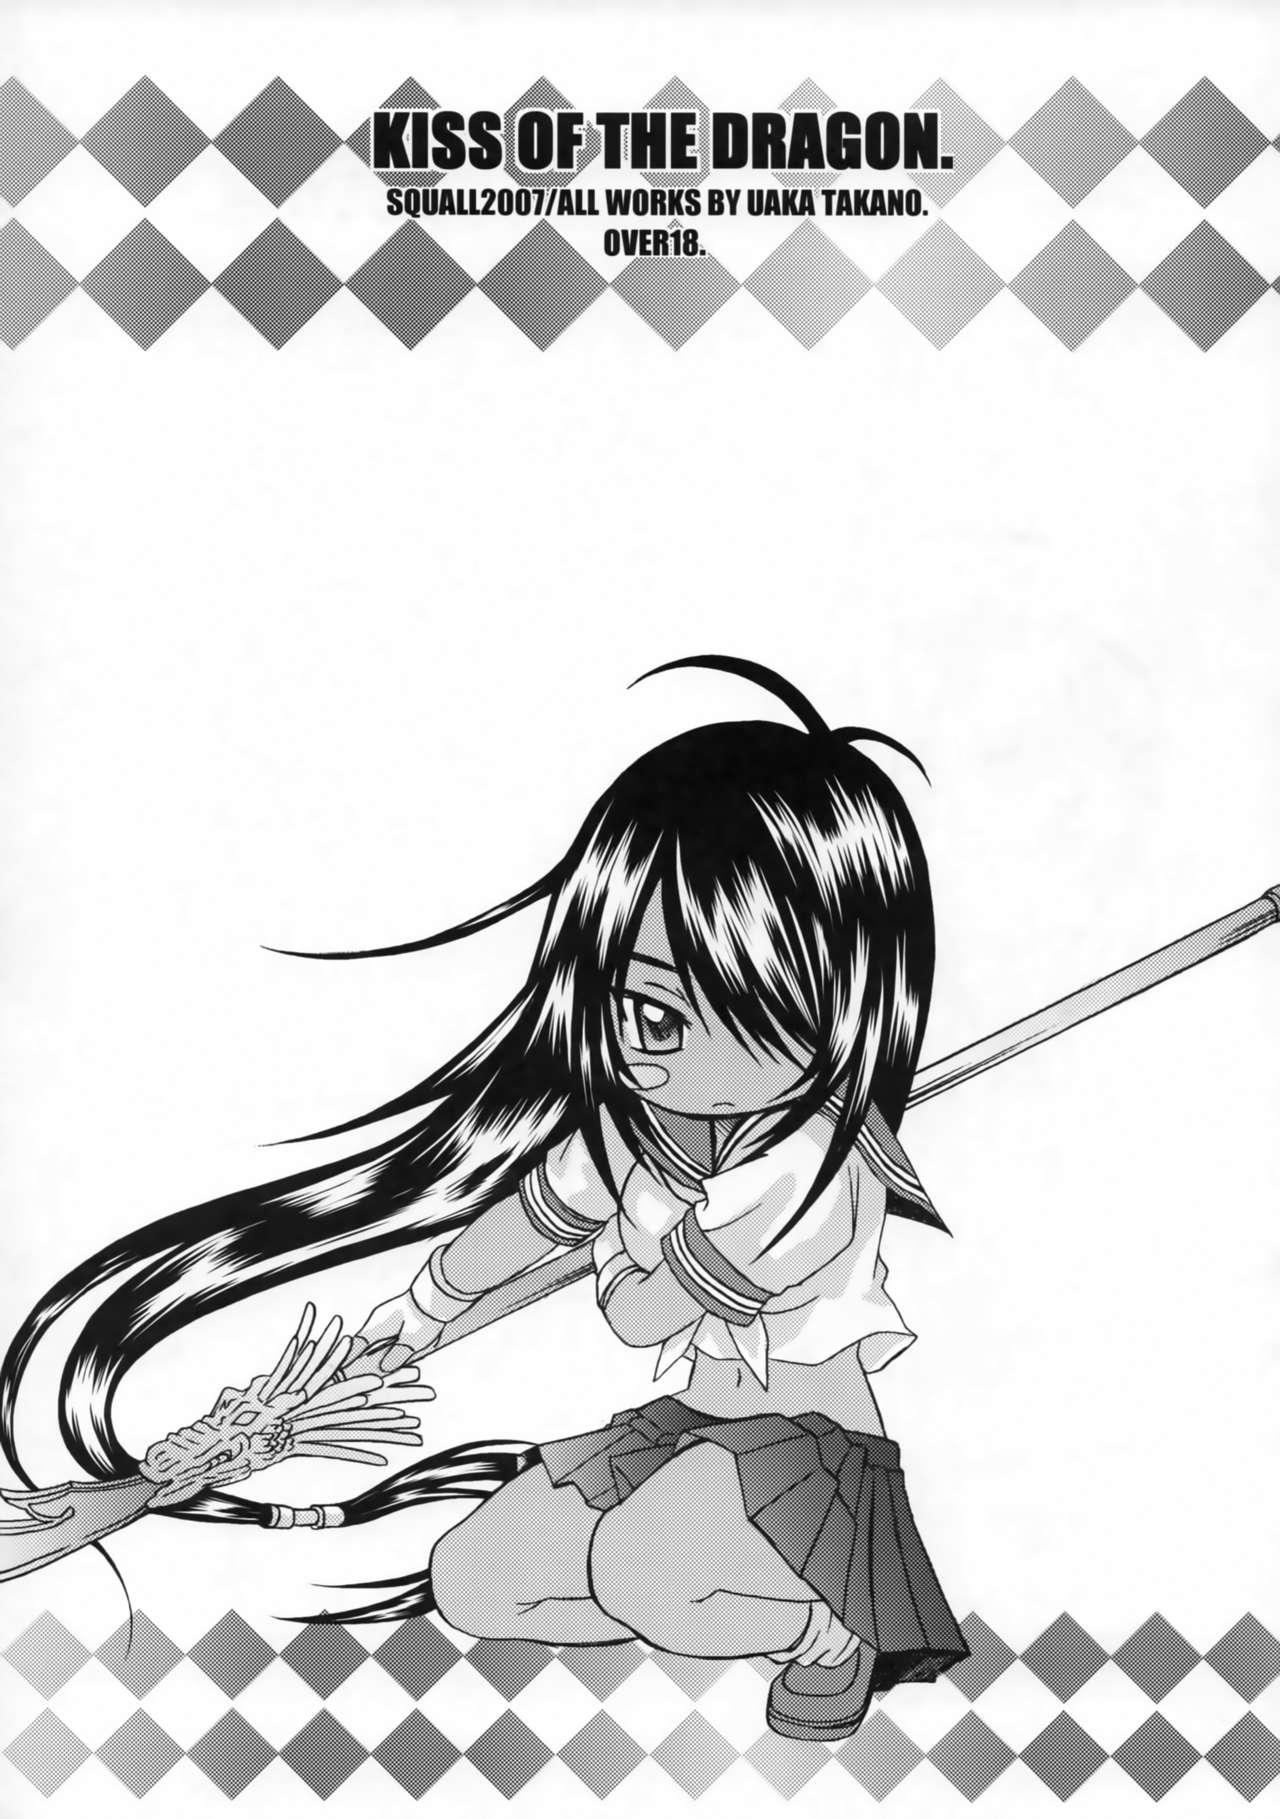 Cam KISS OF THE DRAGON. - Ikkitousen Punishment - Page 2